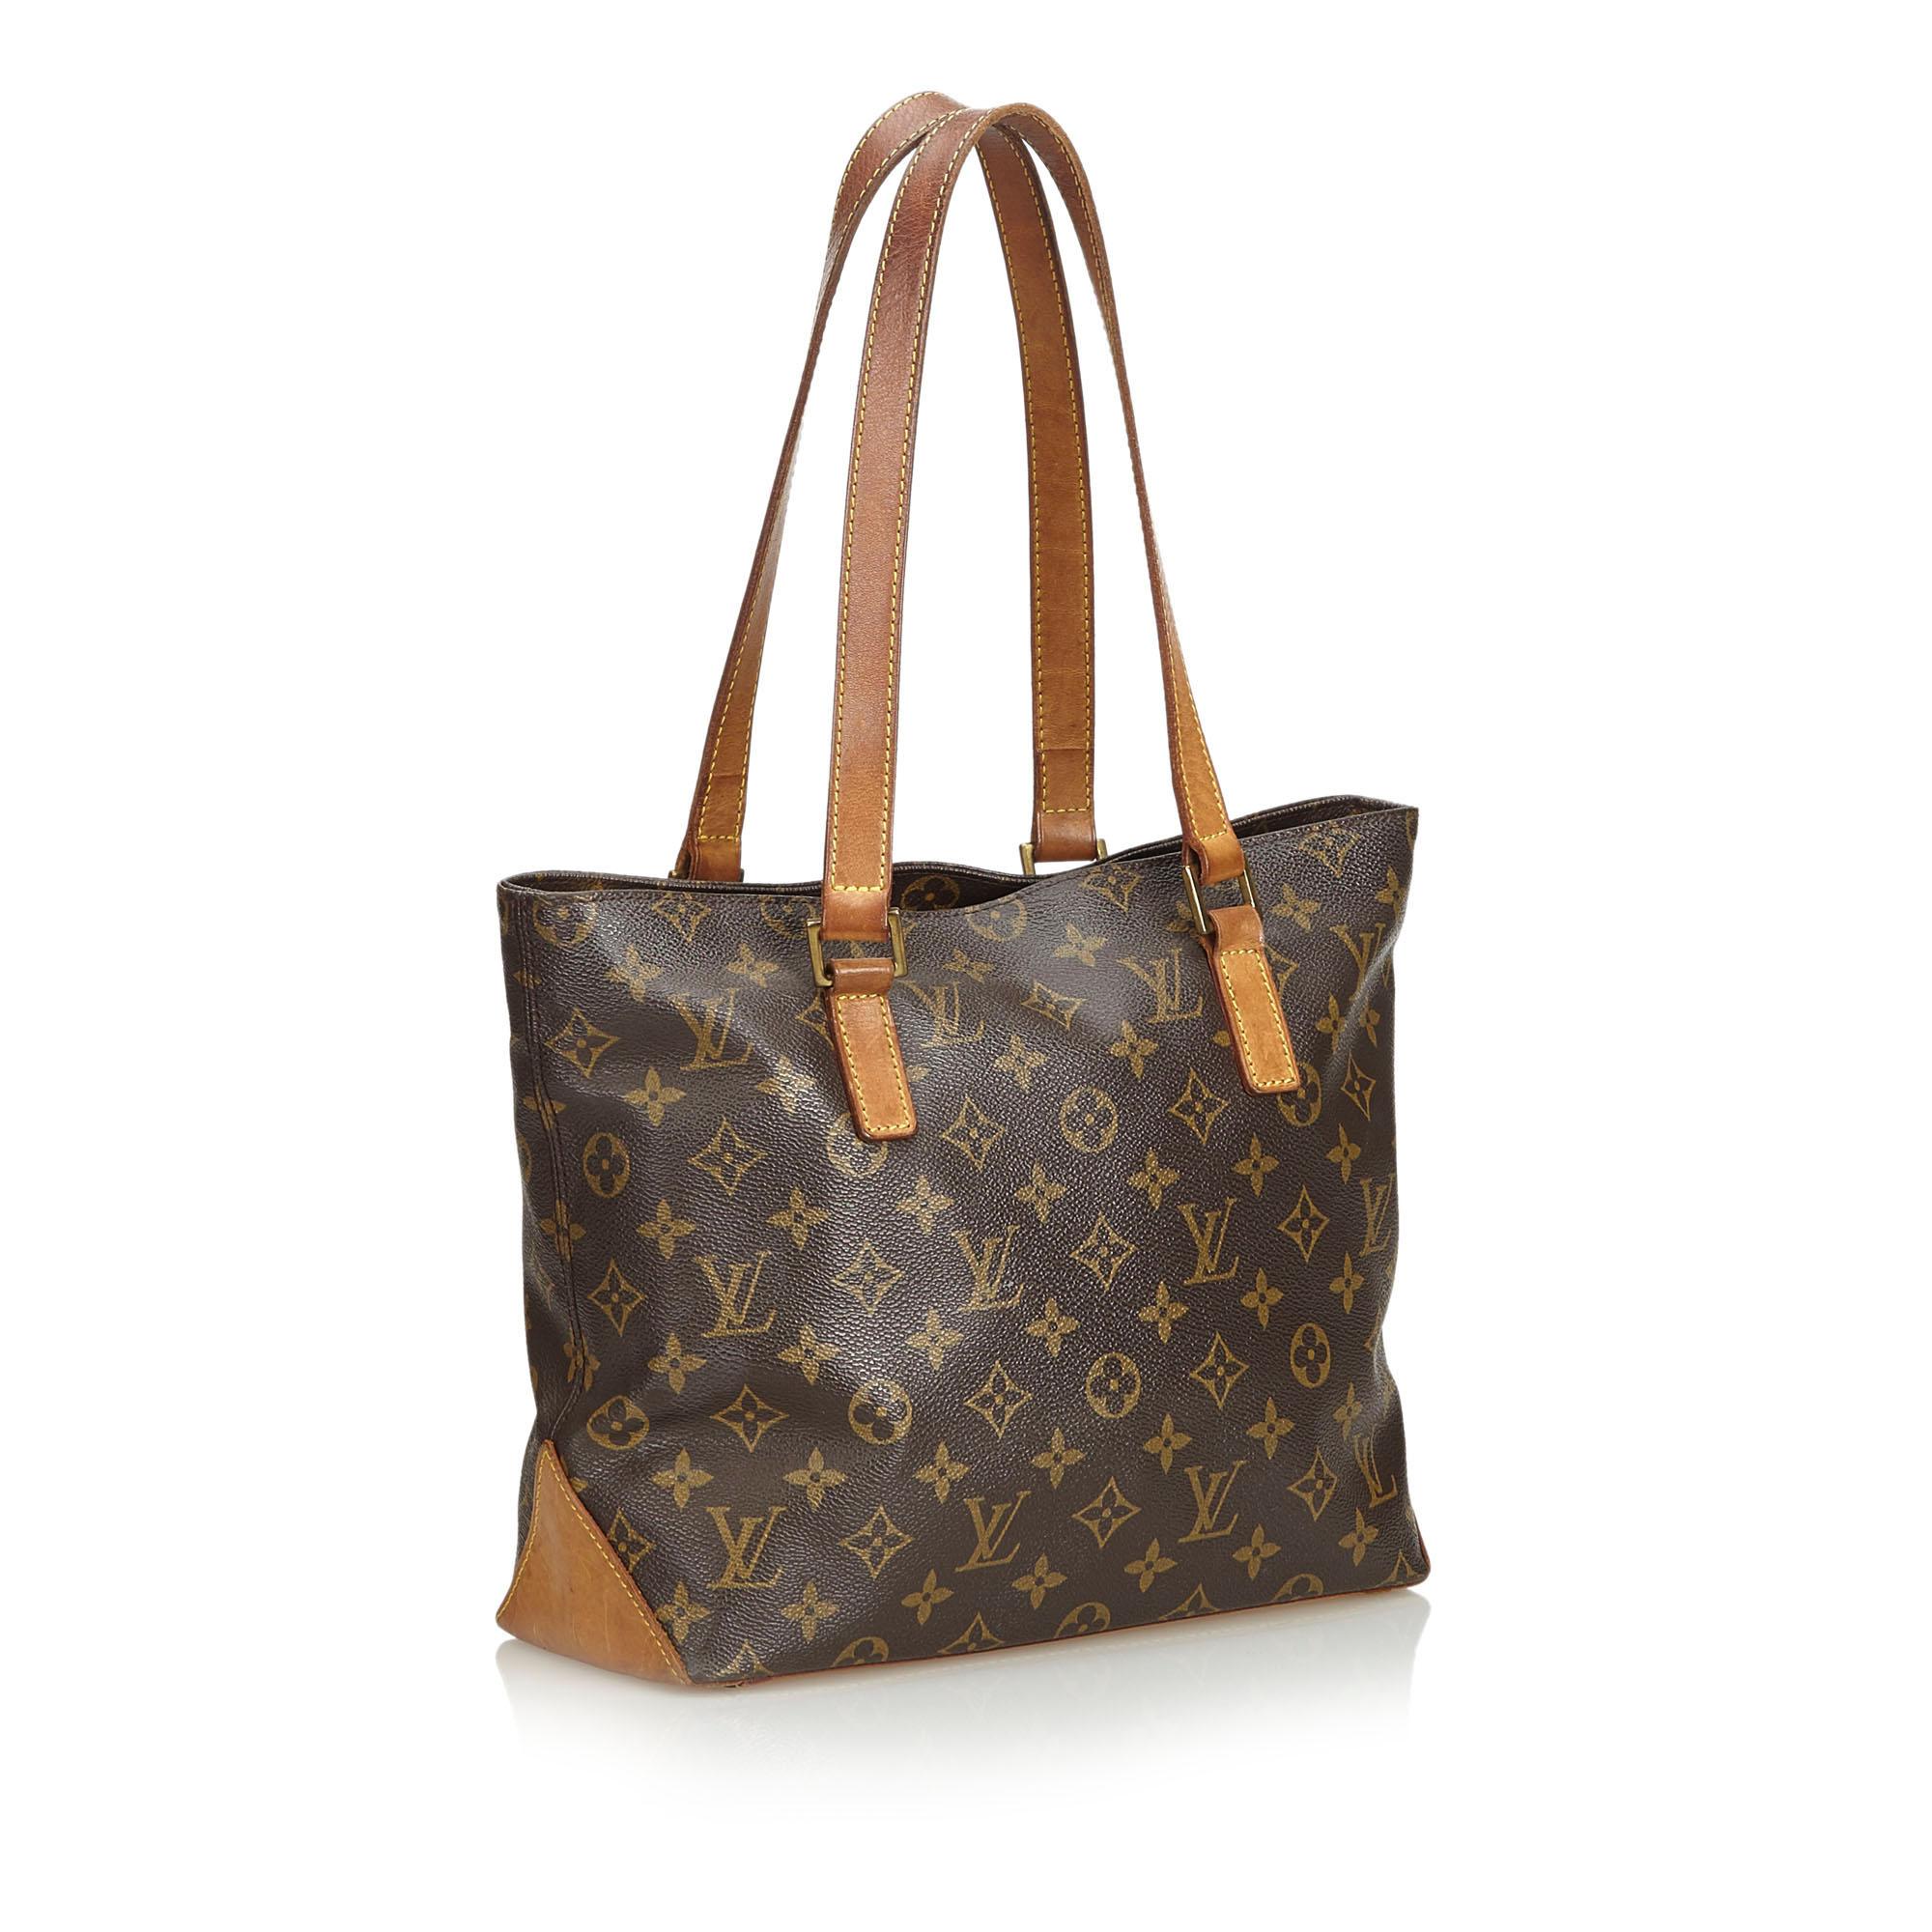 The Cabas Piano features a monogram canvas body, flat leather straps, a top zip closure, and interior zip and slip pockets. It carries as B condition rating.

Inclusions: 
This item does not come with inclusions.


Louis Vuitton pieces do not come